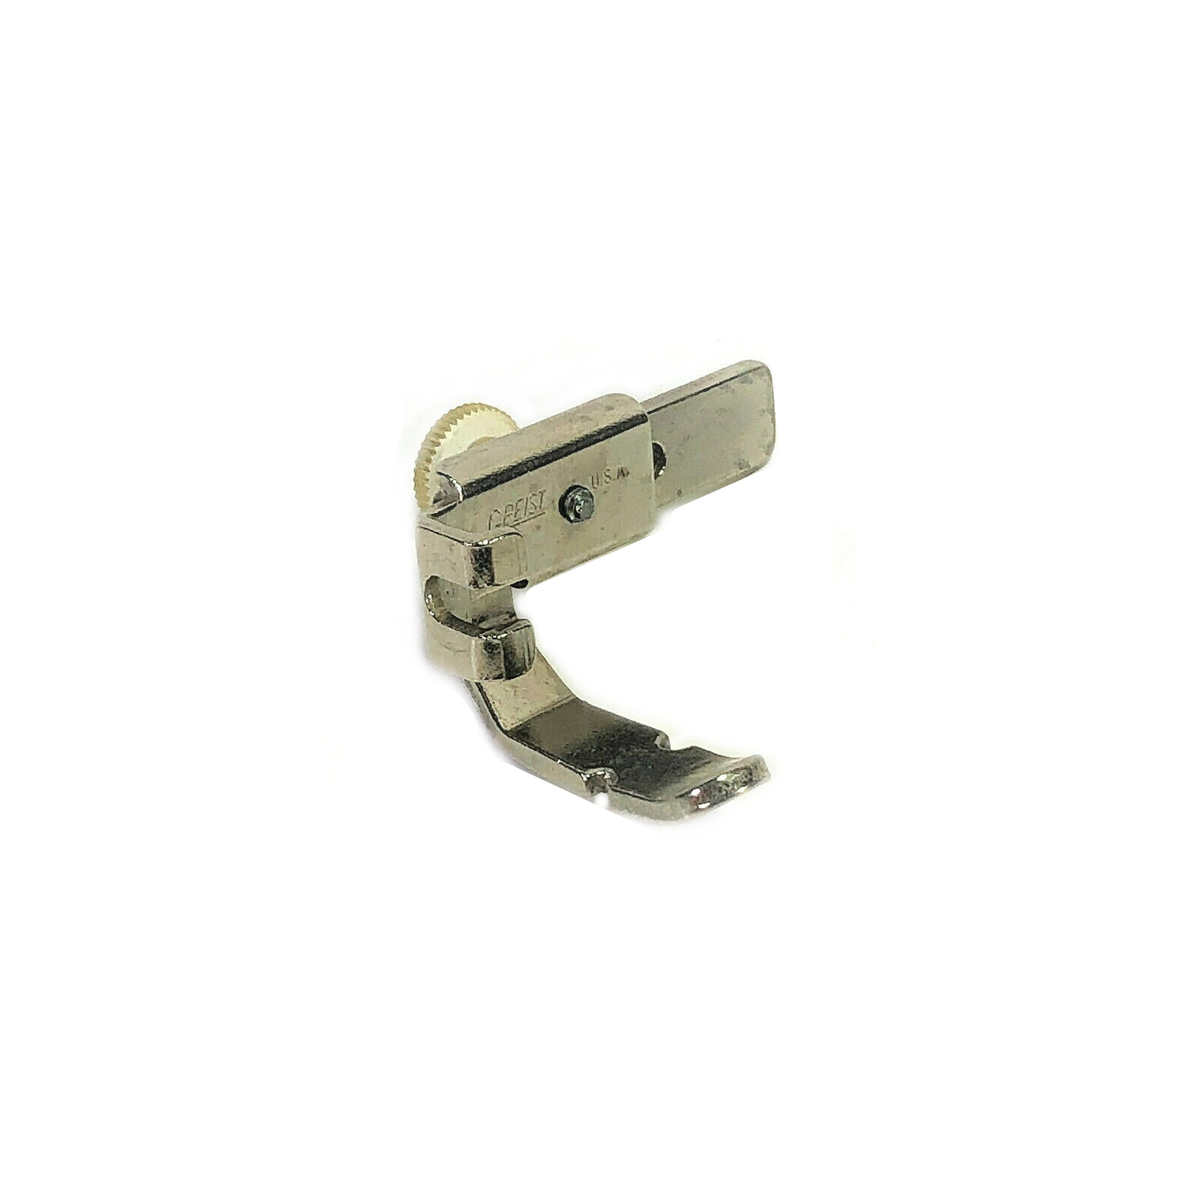 Distinctive Adjustable Zipper Piping Cording Sewing Machine Presser Foot -  Fits All Low Shank Singer : Target